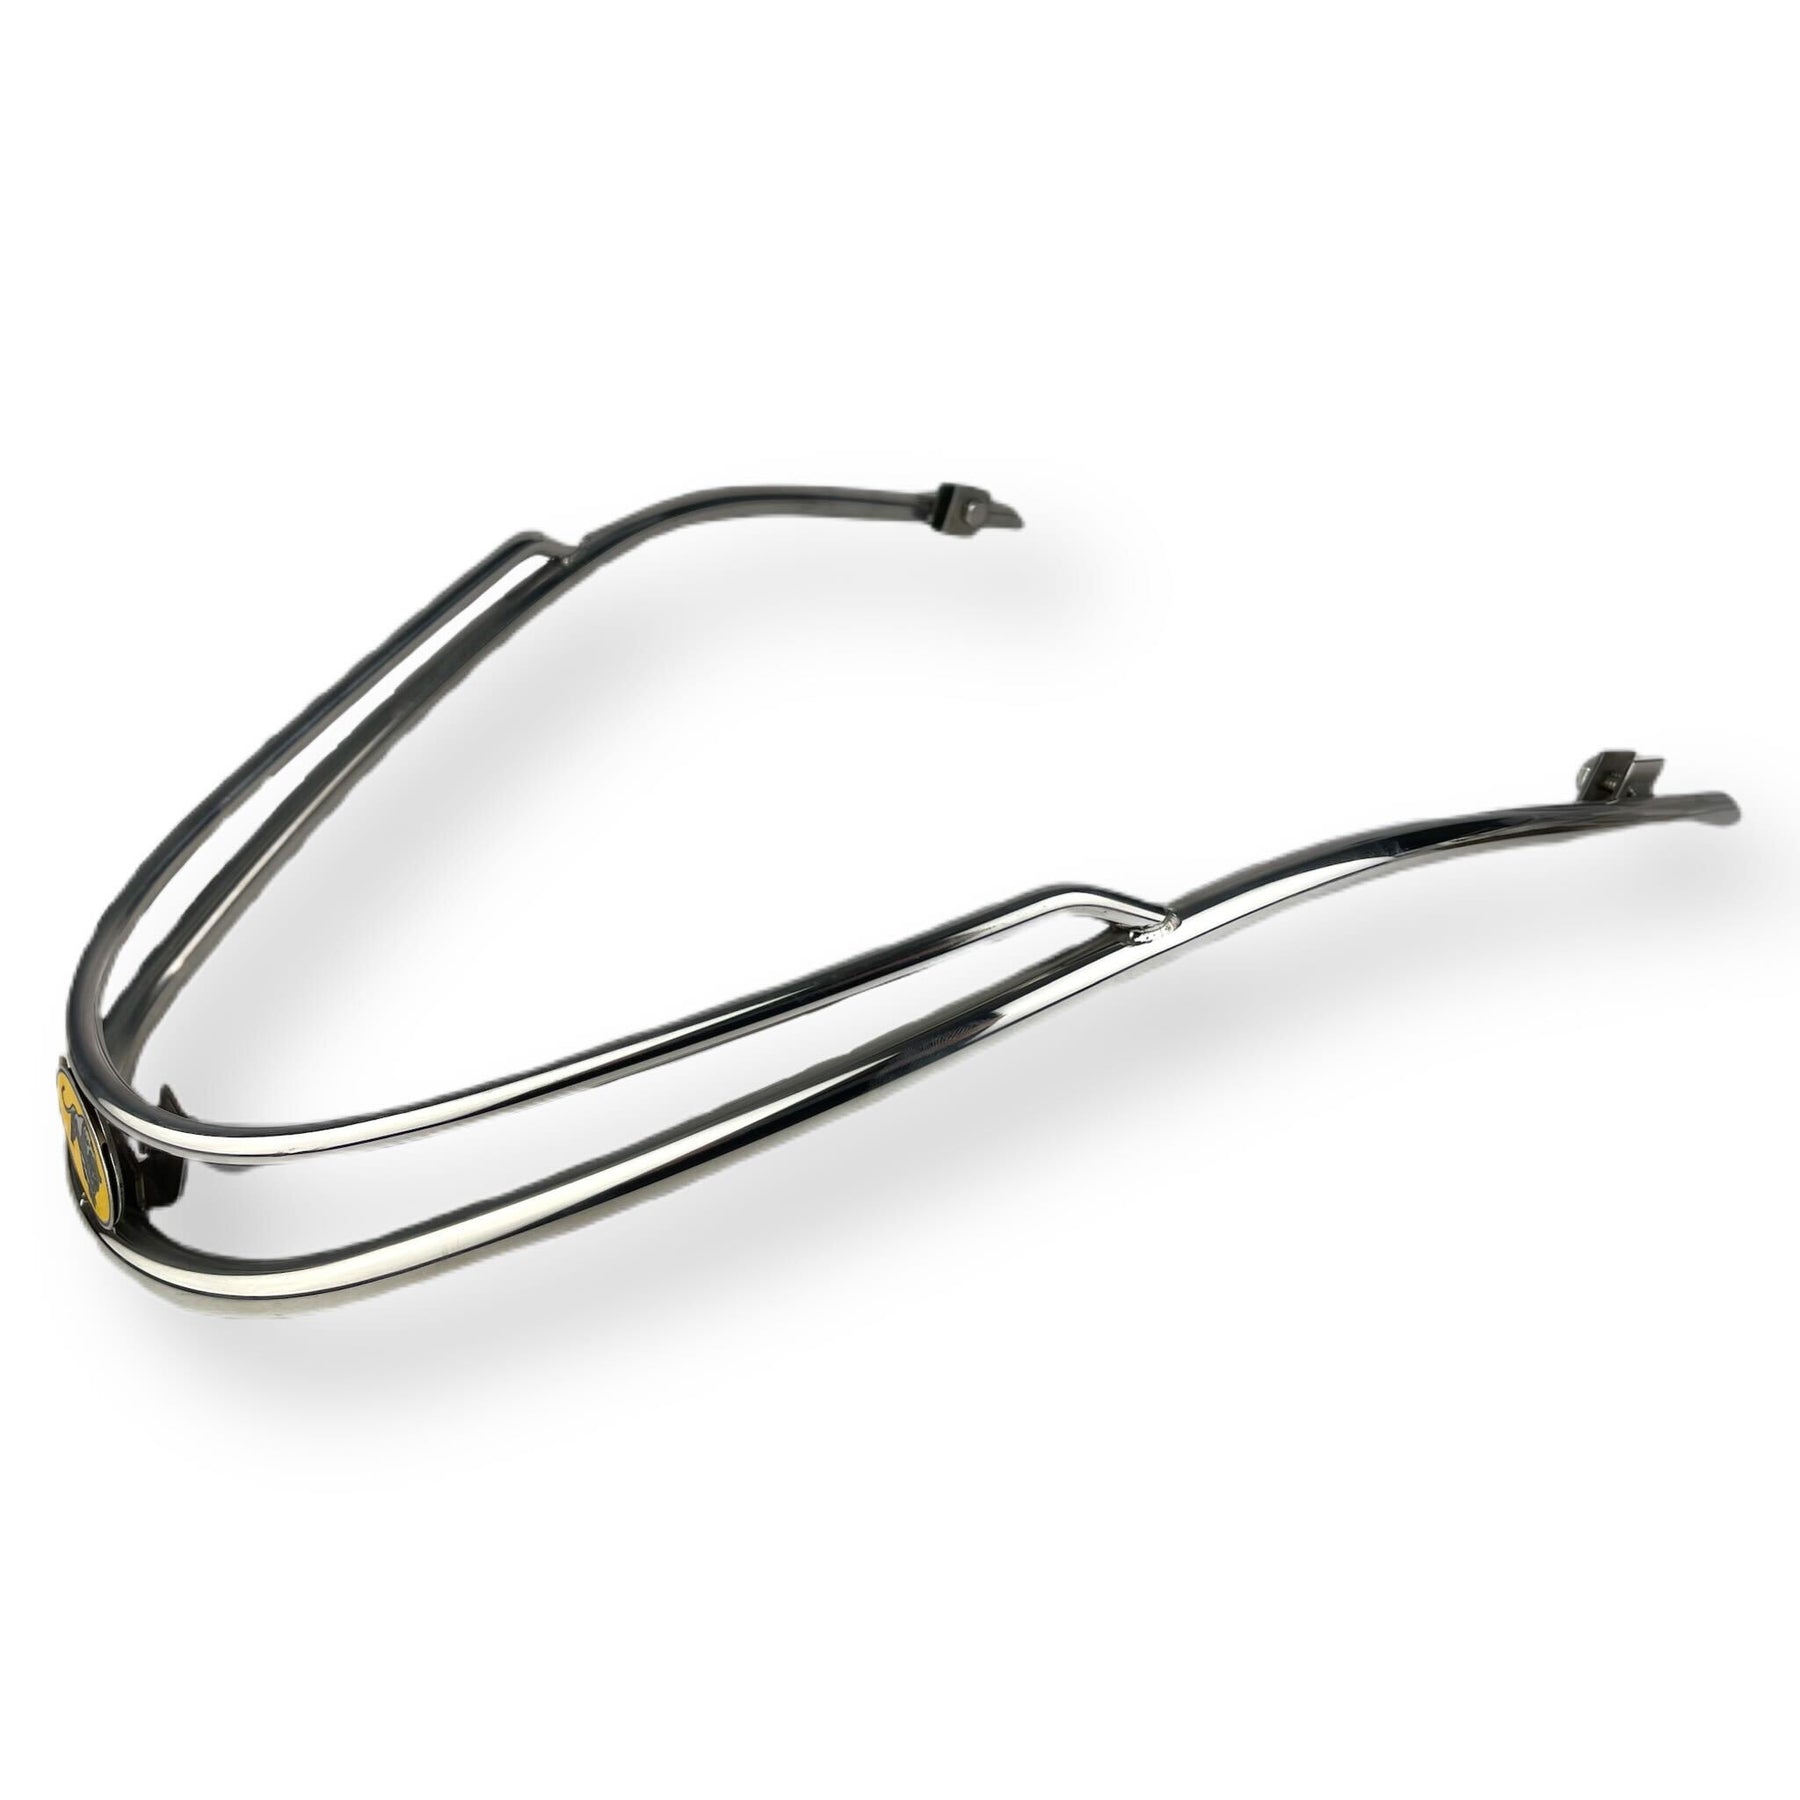 Scomadi TL TT 125-200 Front Bumper Bar Curved Trim Scomadi Badge - Polished Stainless Steel